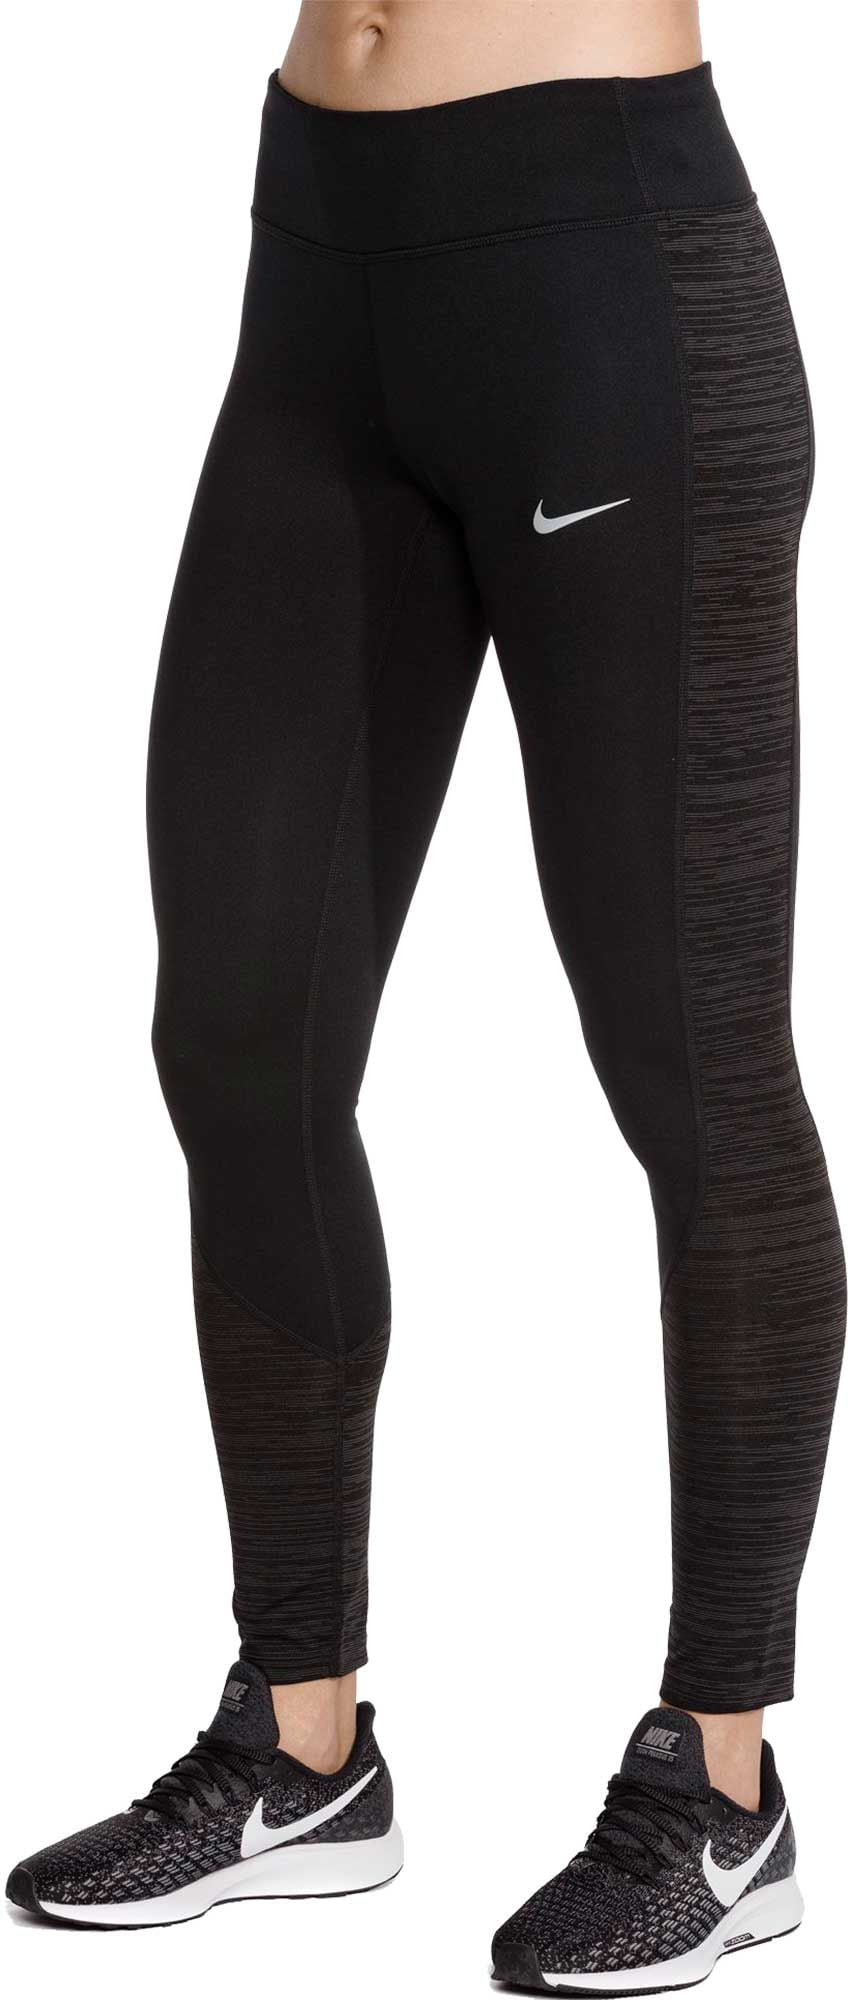 nike performance racer tights